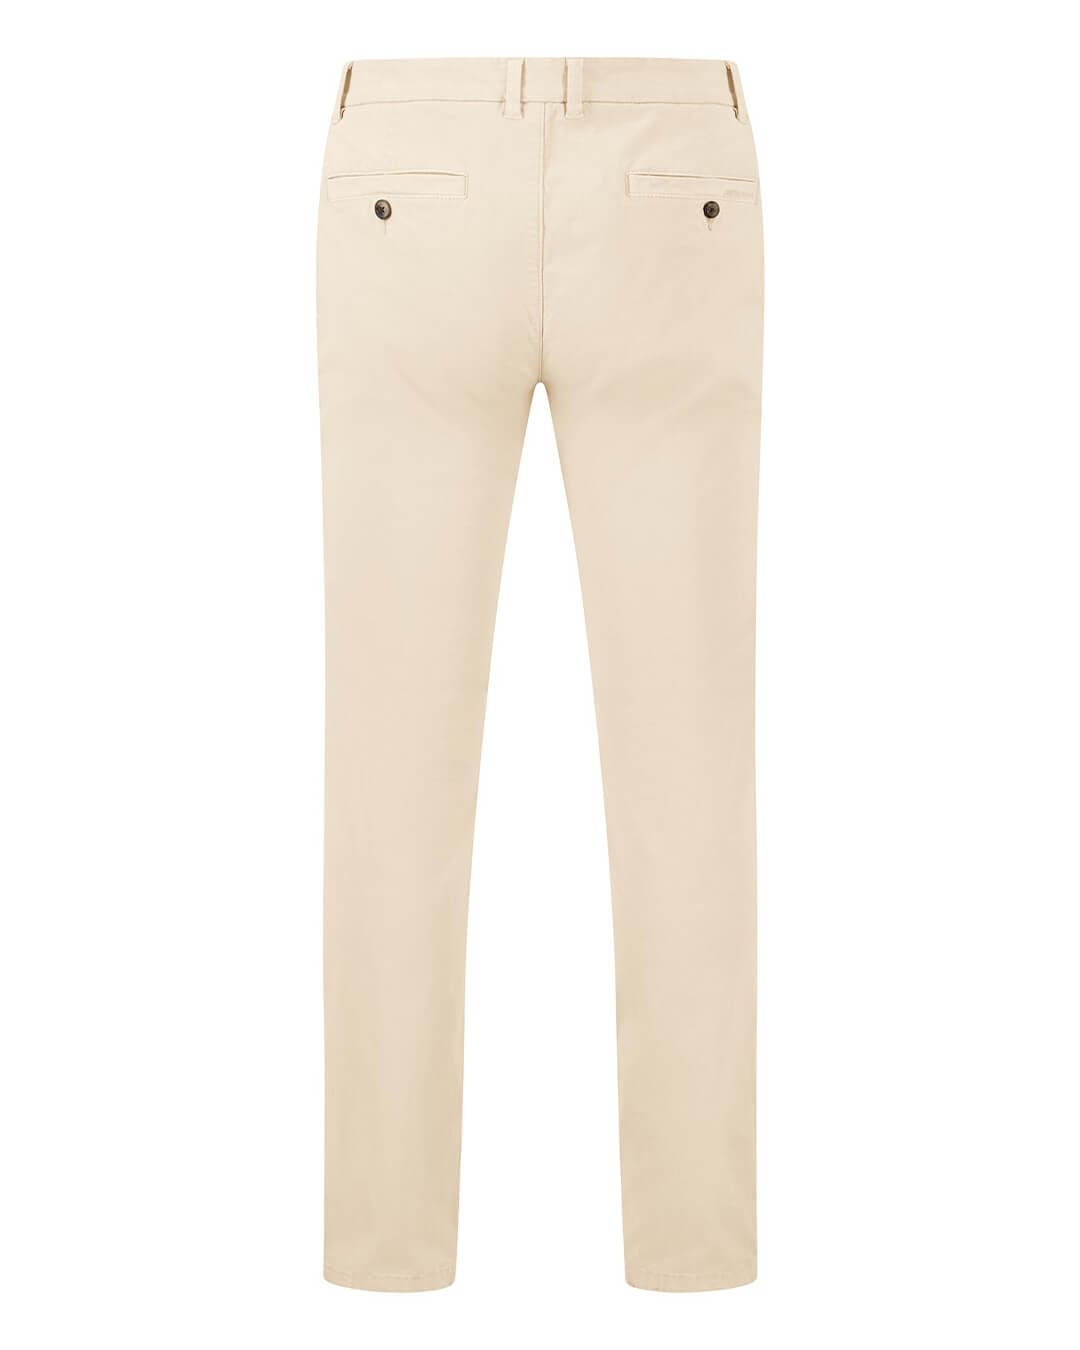 Fynch-Hatton Trousers Fynch-Hatton Off White Summer Stretch Chino Trousers